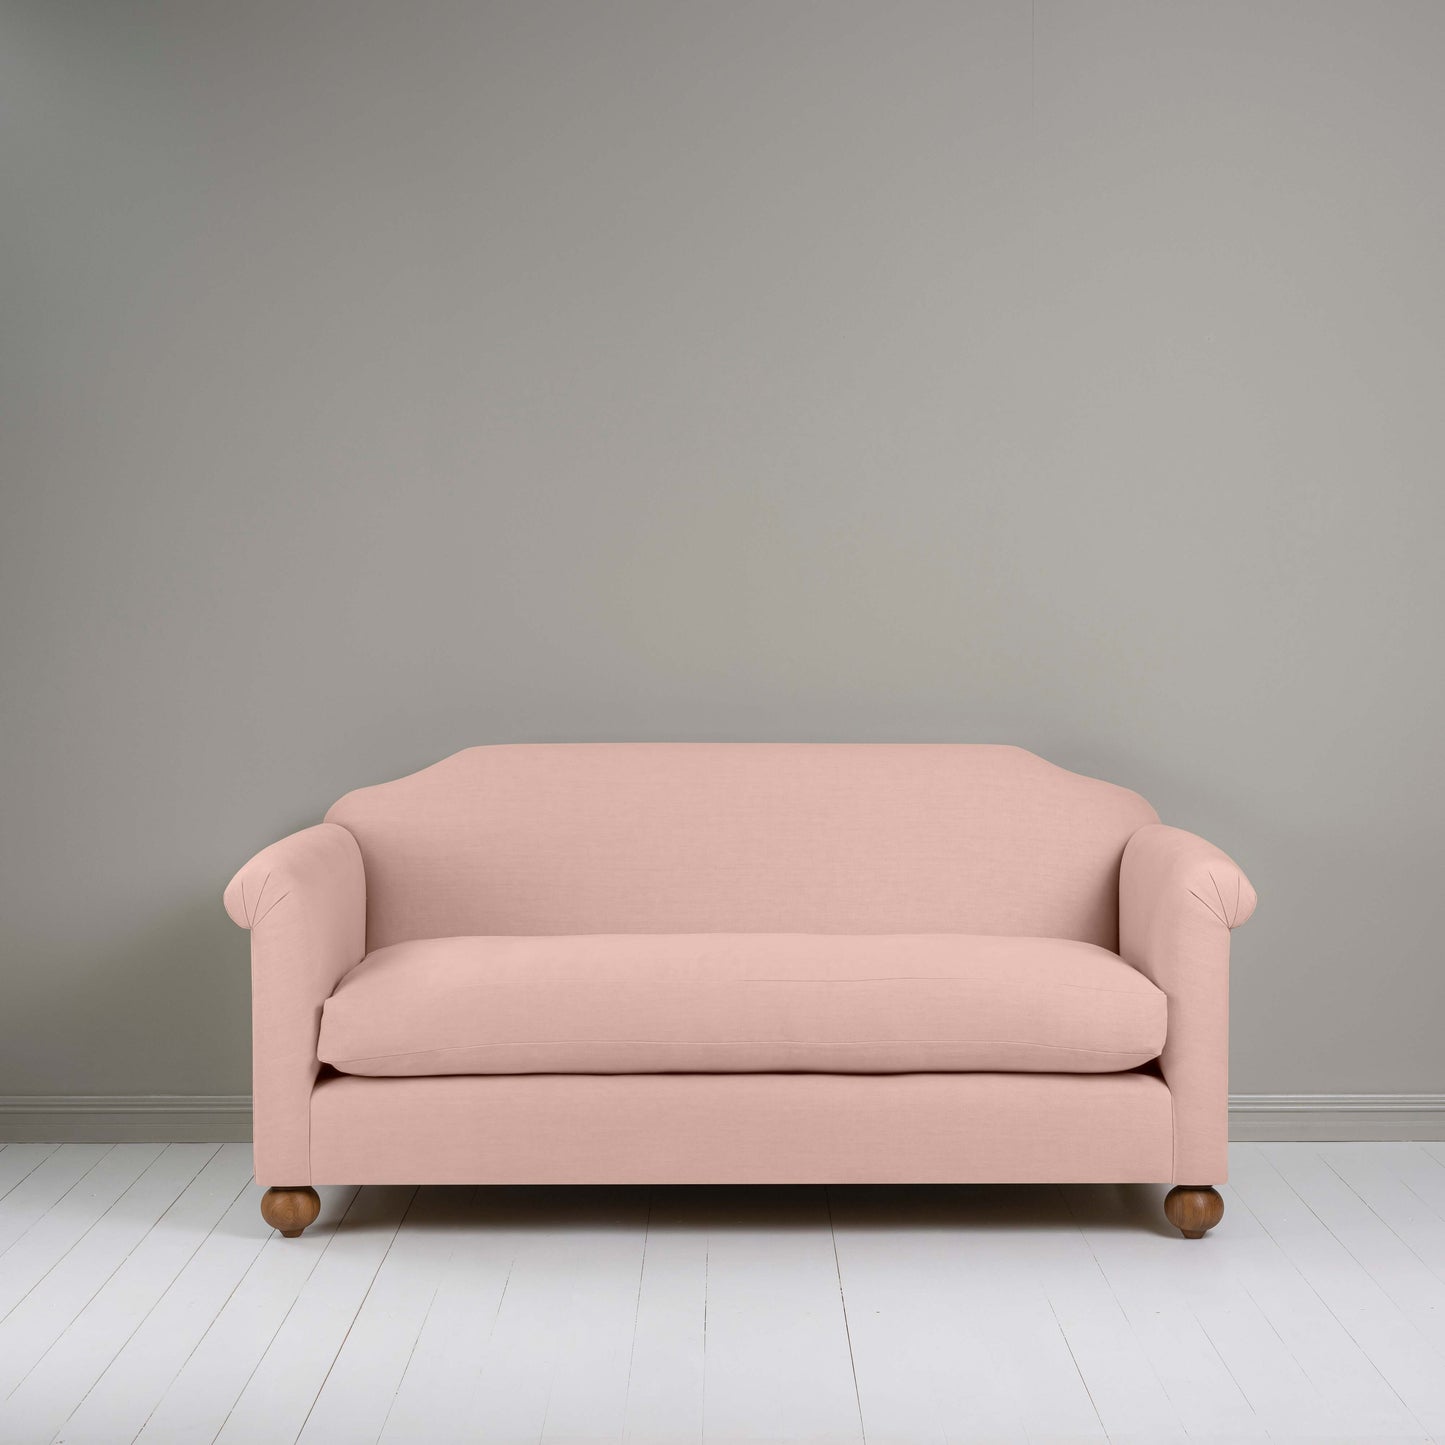 Dolittle 3 Seater Sofa in Laidback Linen Dusky Pink